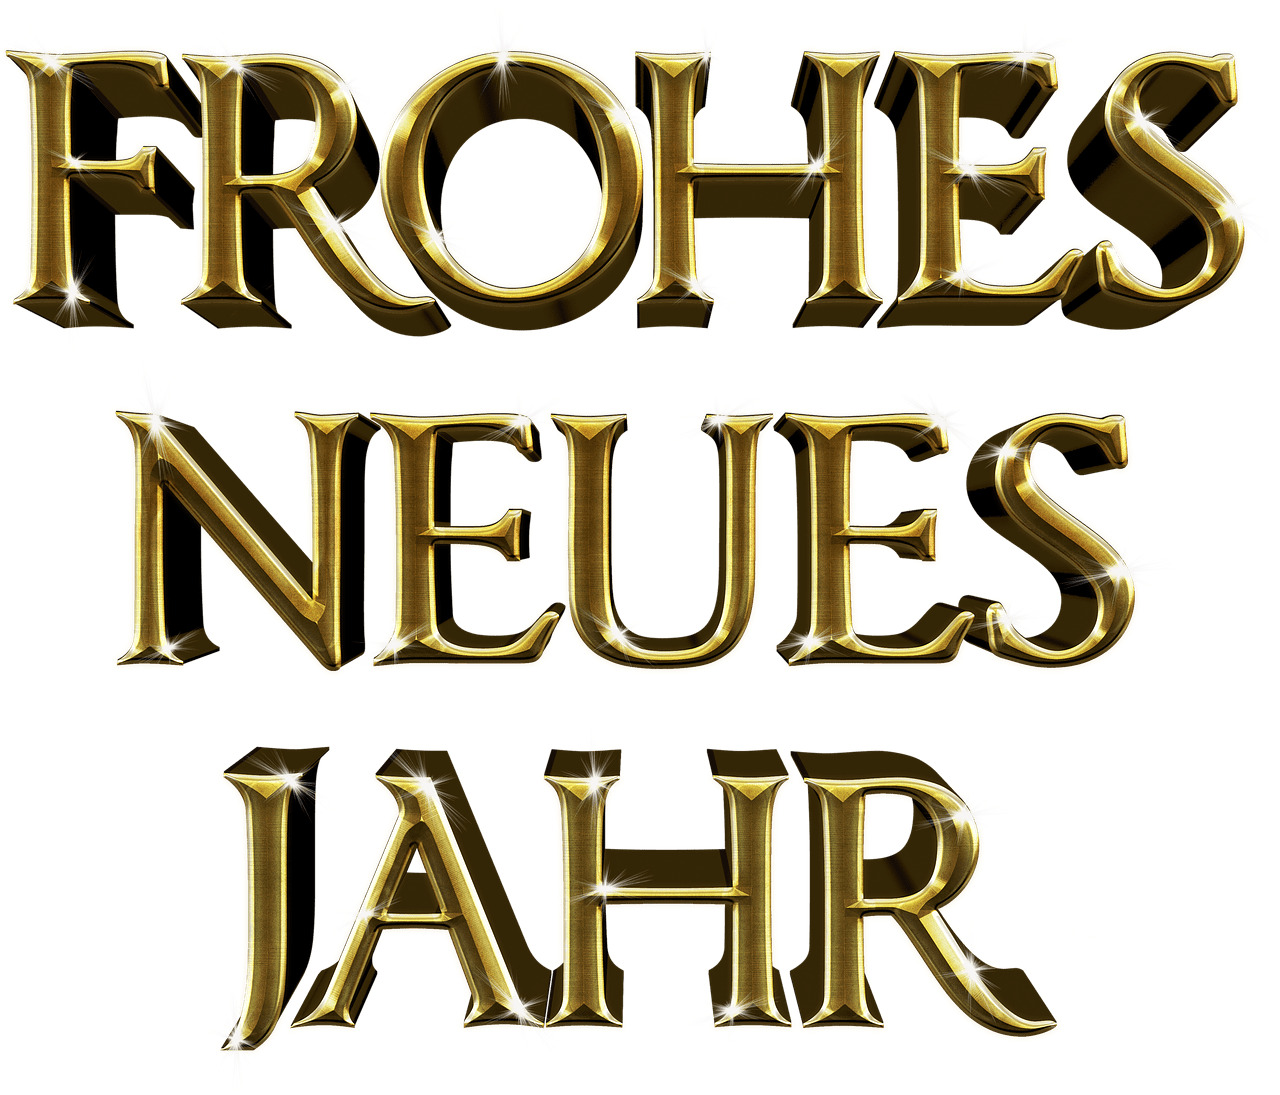 Frohes Neues Jahr icons